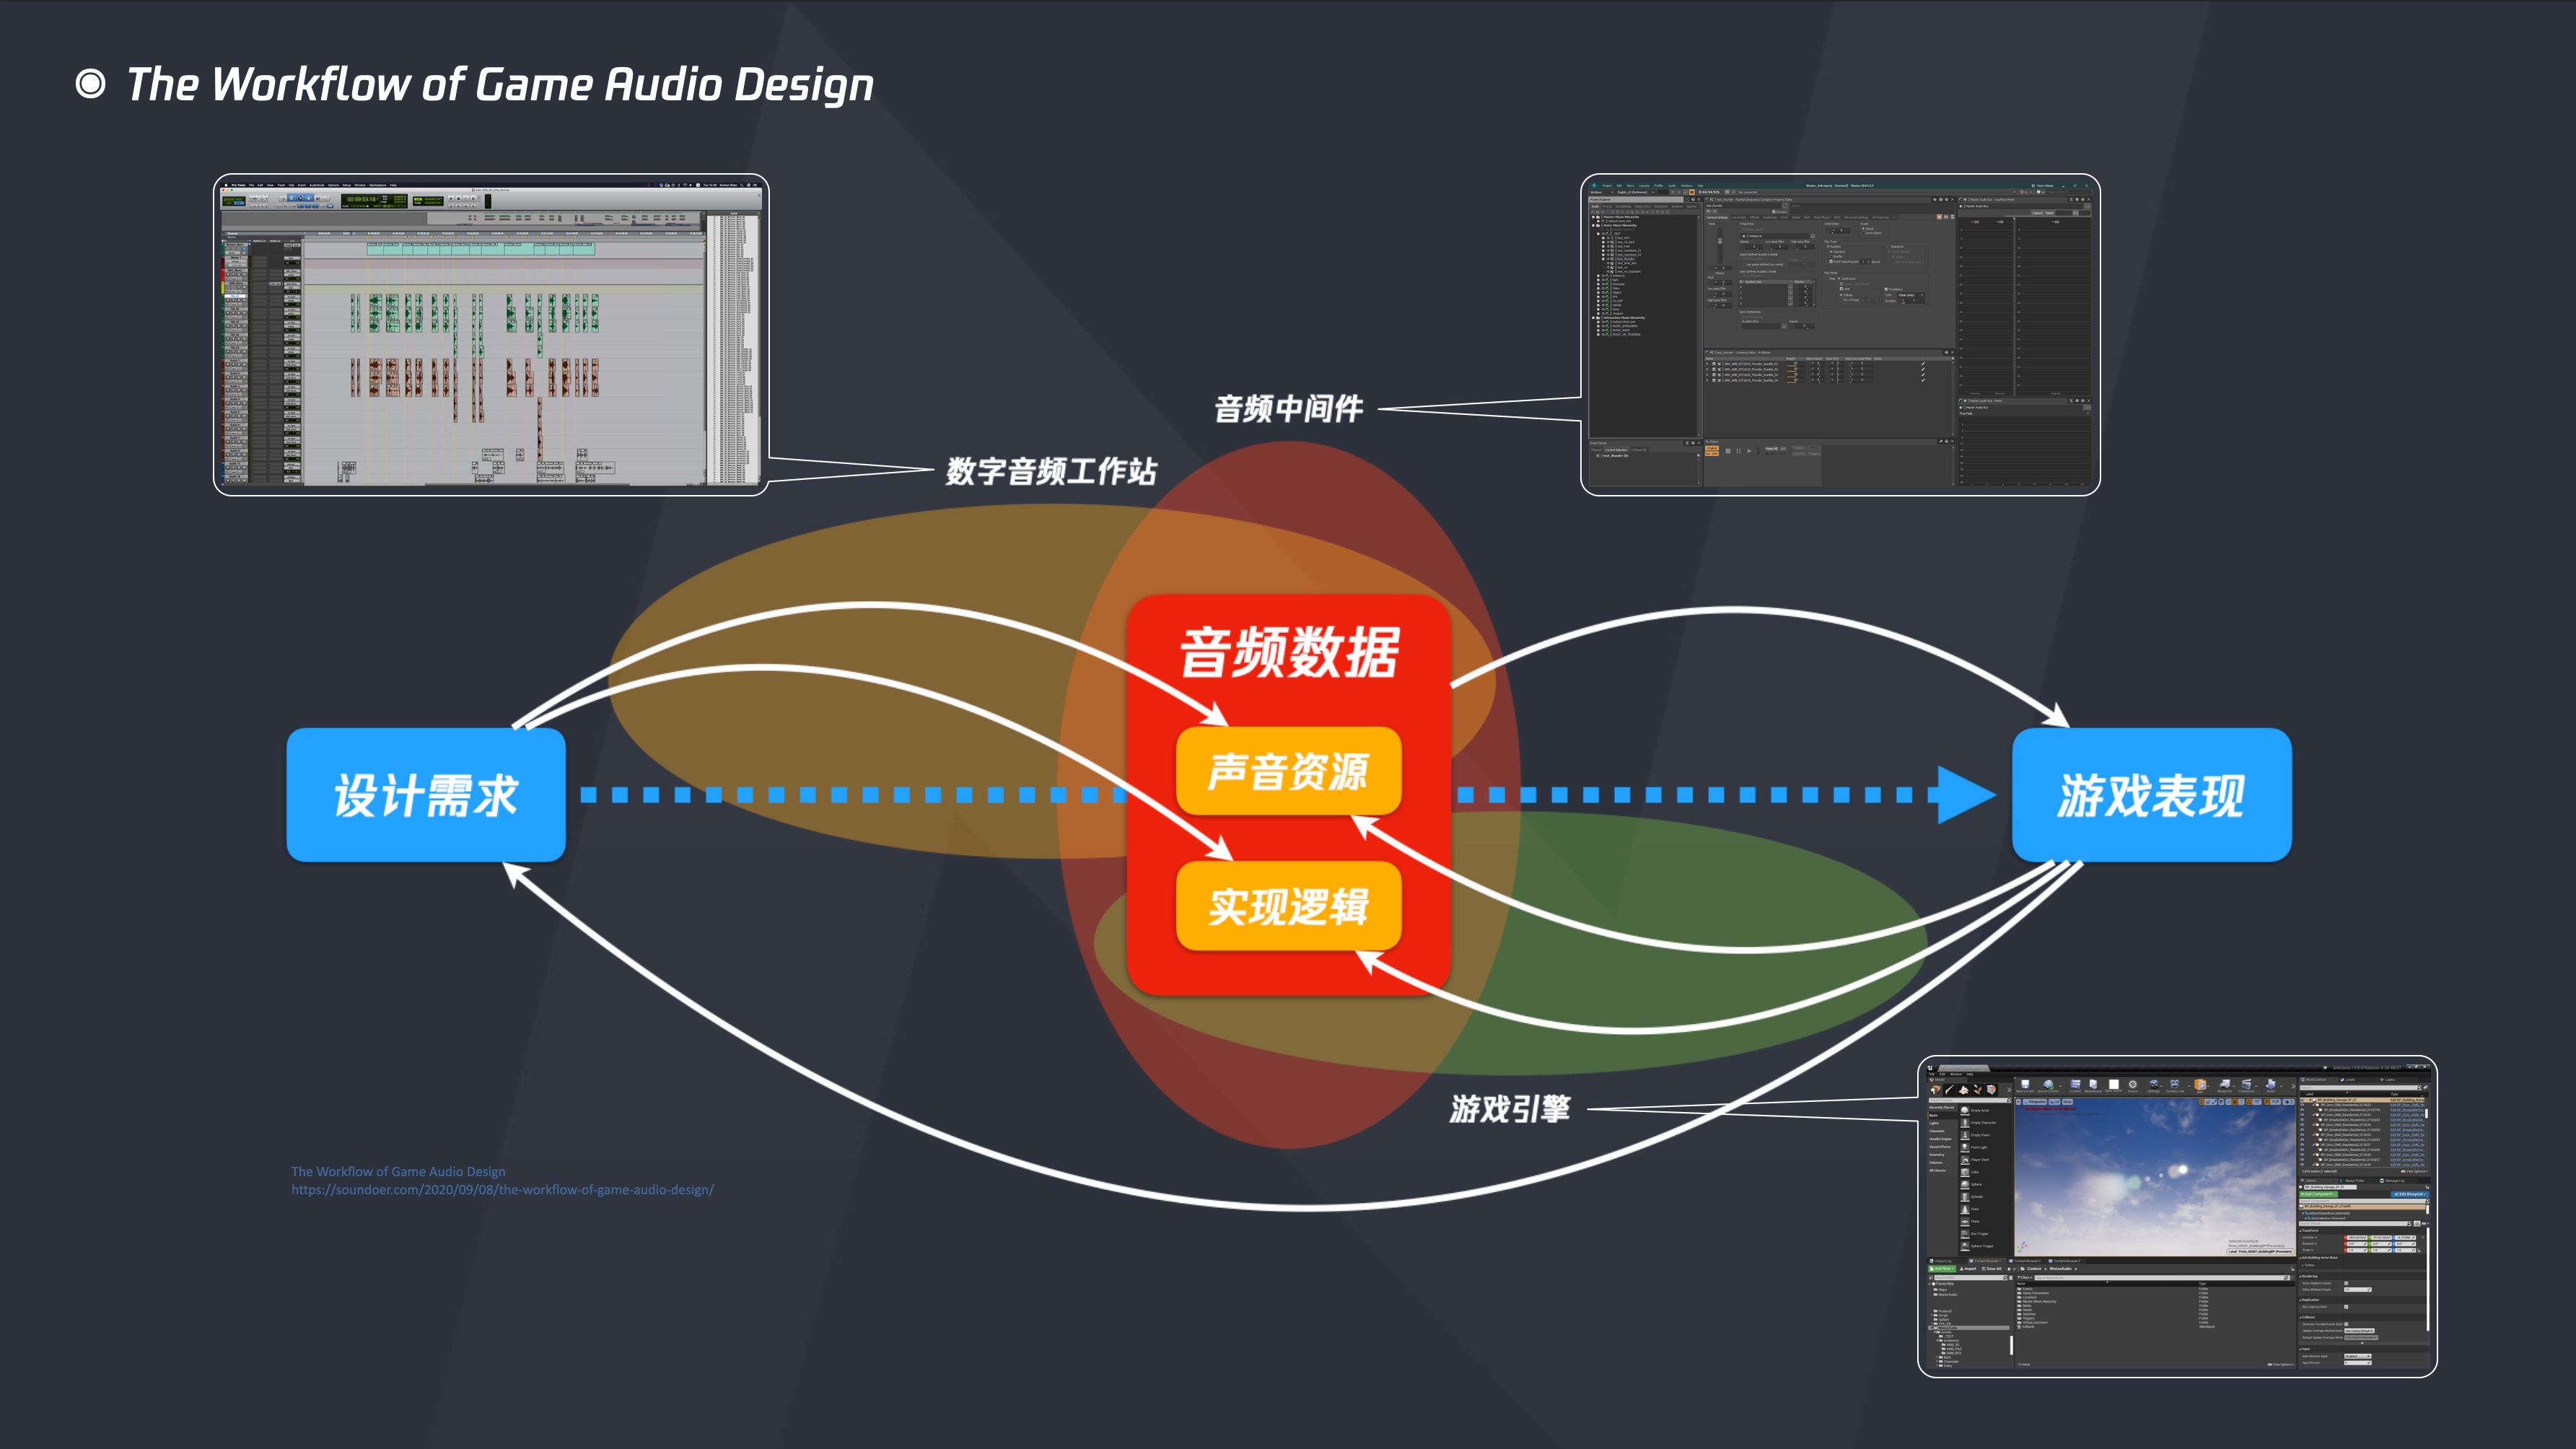 The Workflow of Game Audio Design